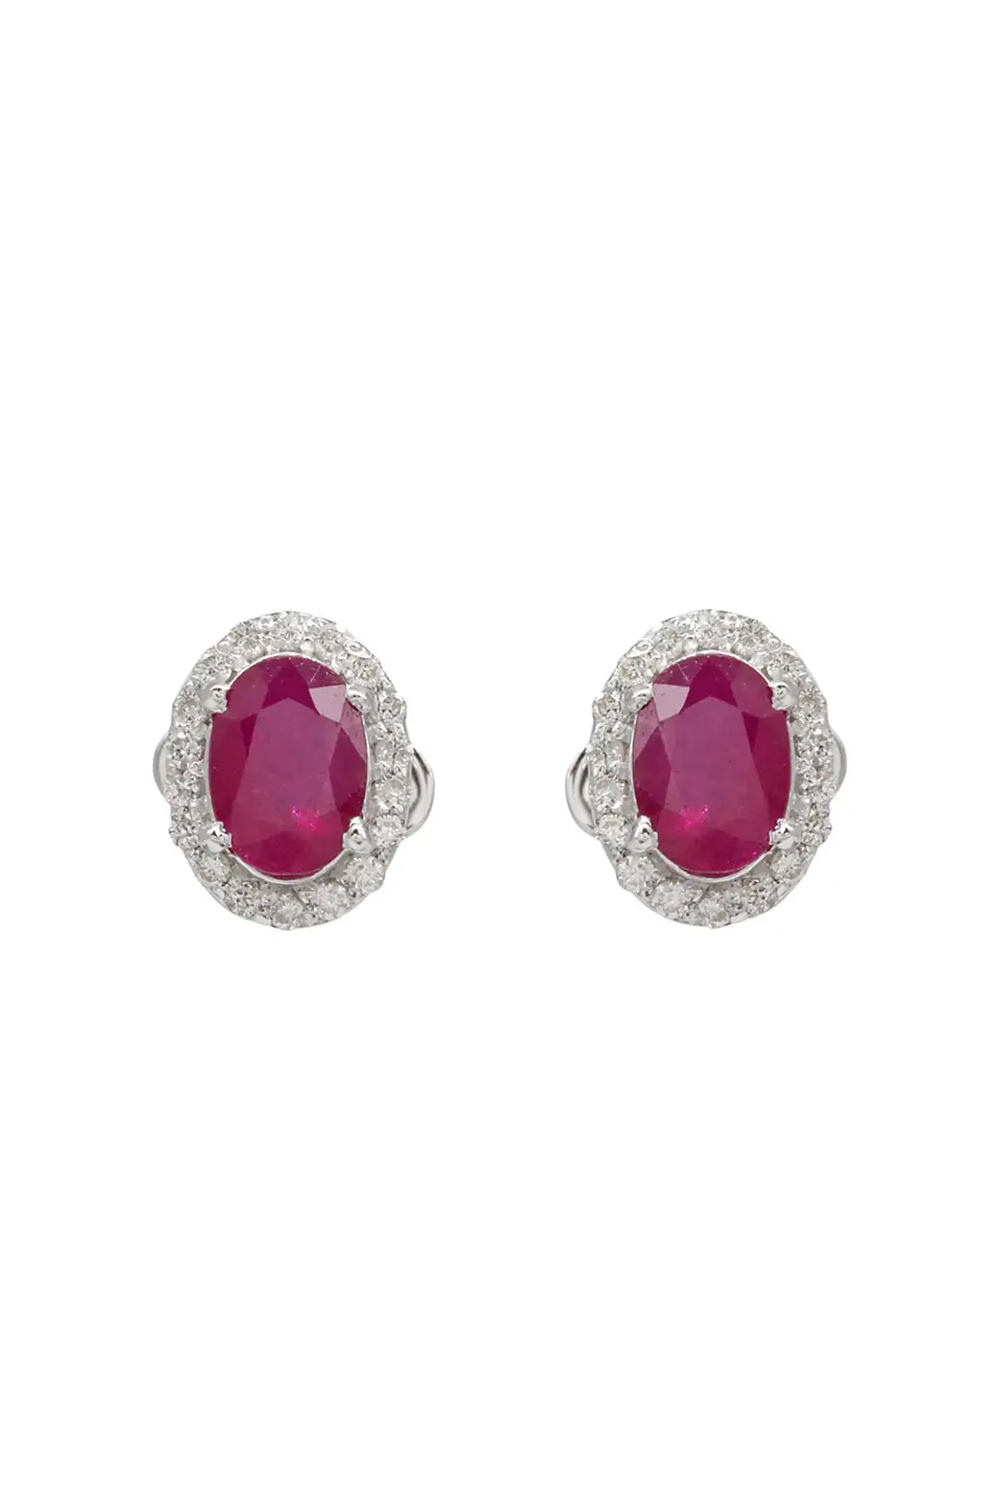 18k gold 0.23cts Diamond & 1.65cts Ruby Earring